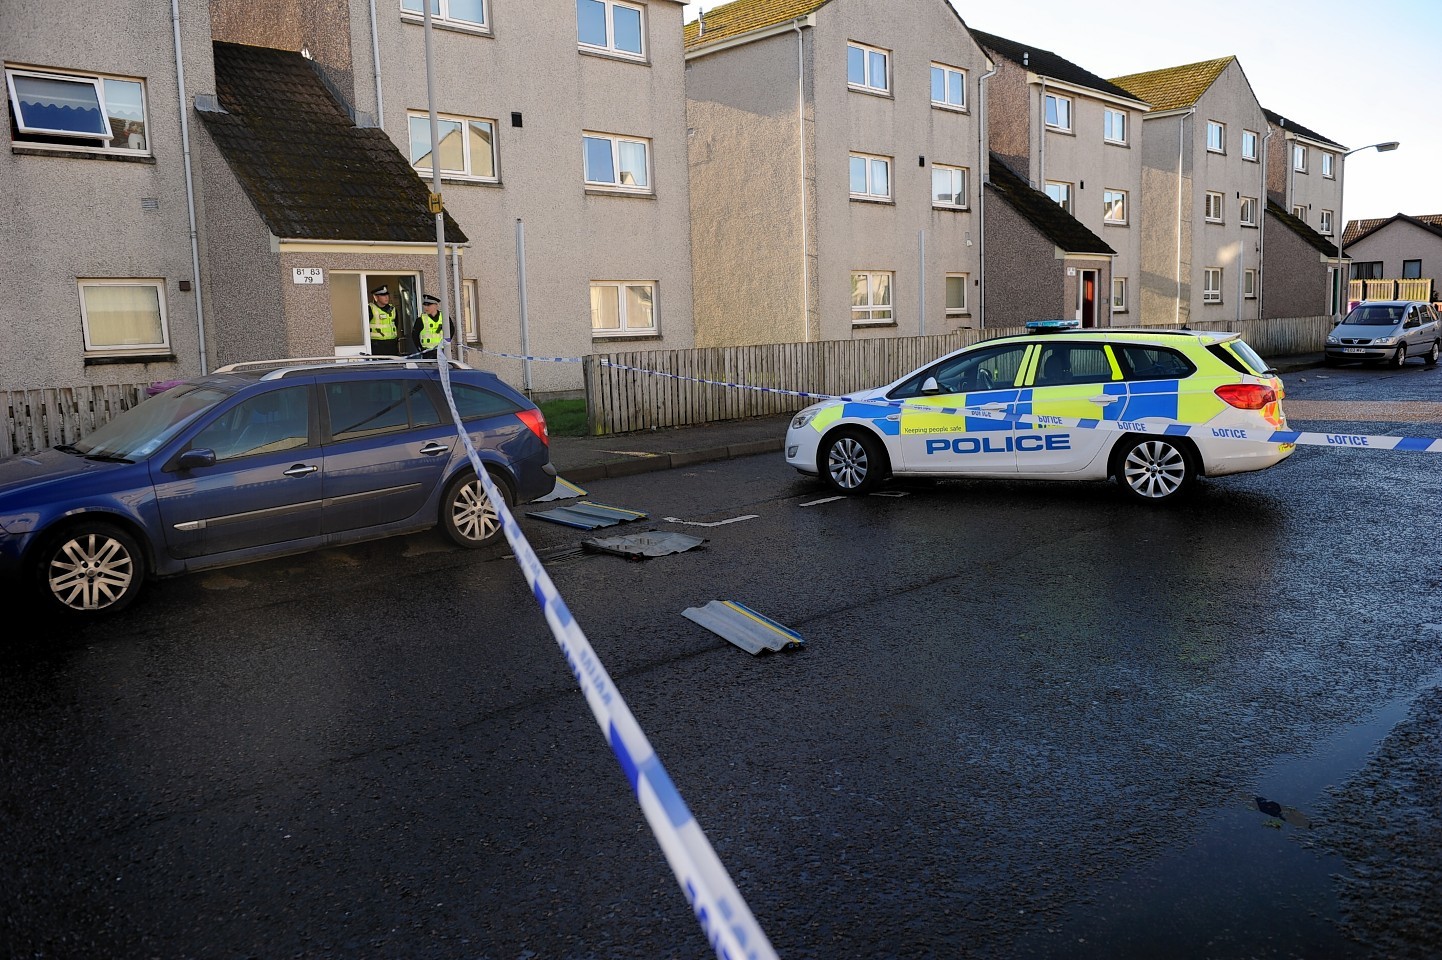 Police at the scene of the incident in Elgin